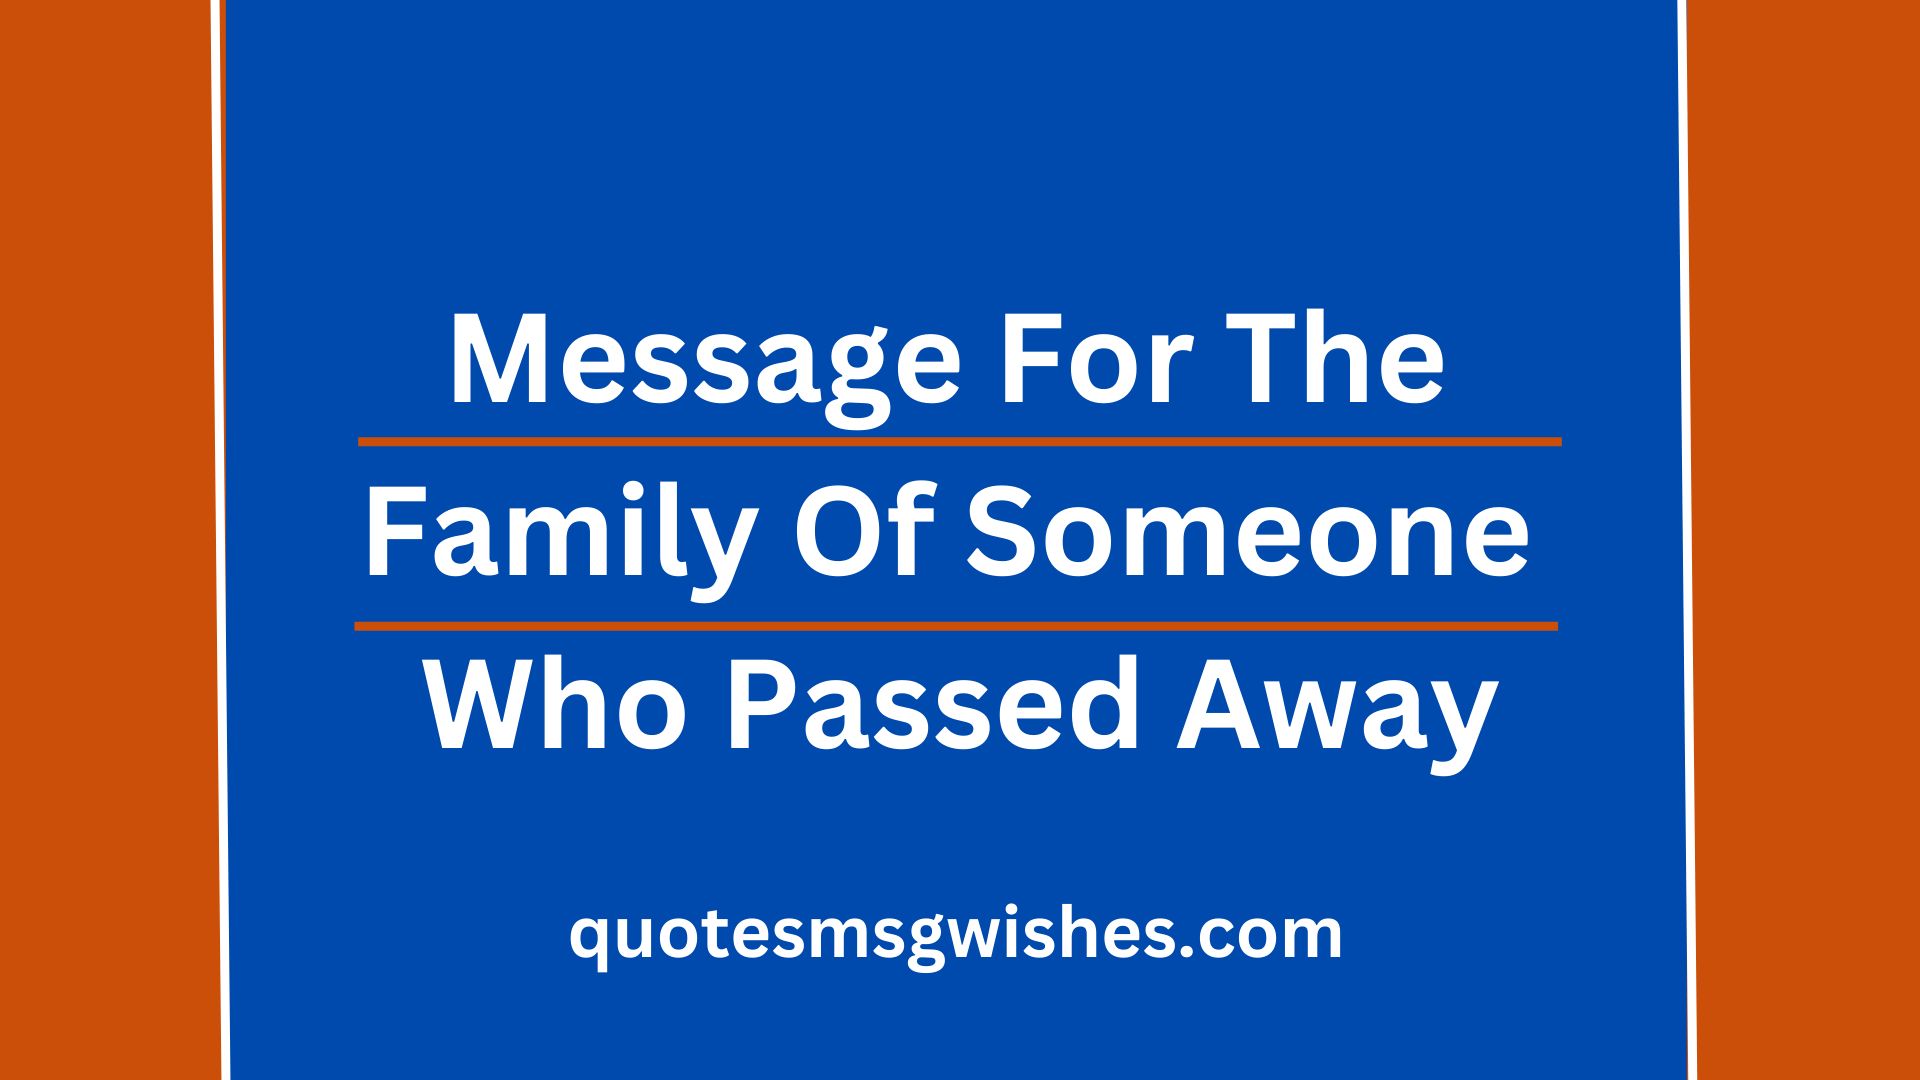 Message For The Family Of Someone Who Passed Away